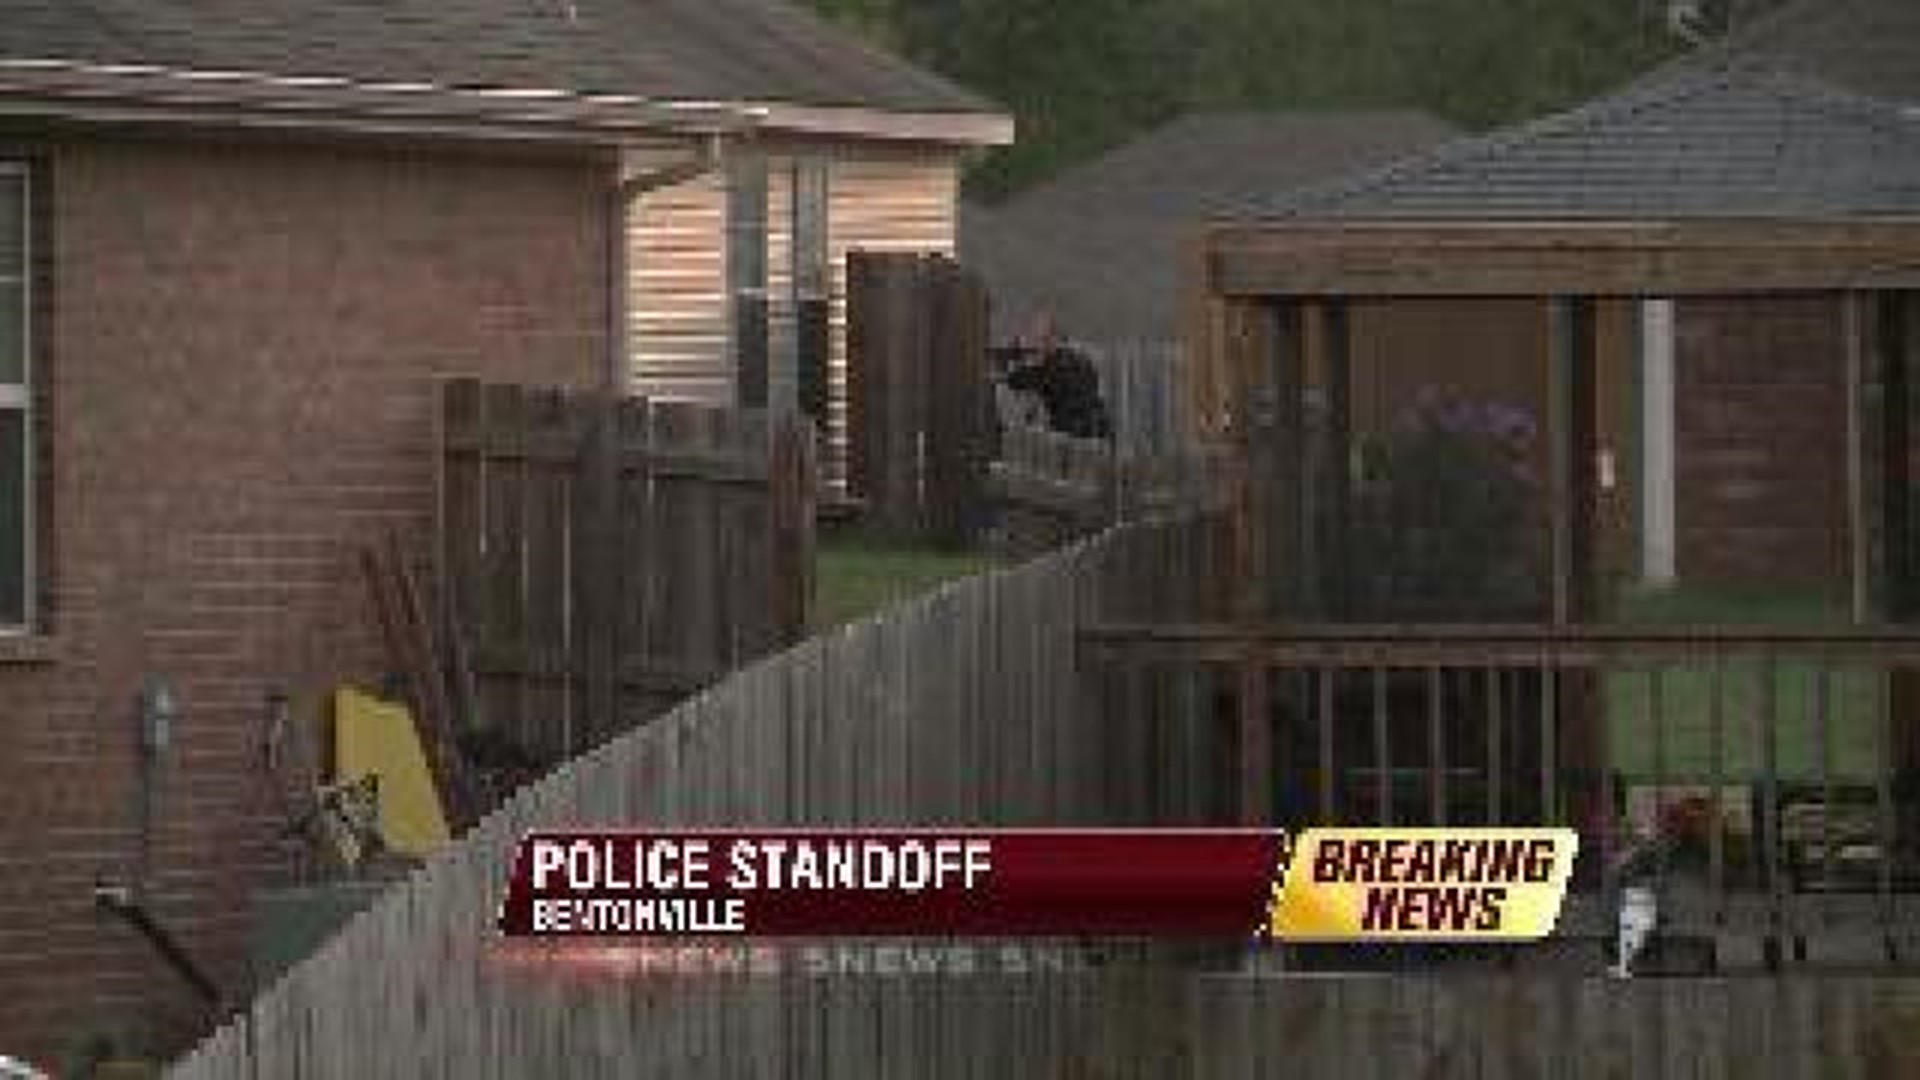 Police in Bentonville negotiate with an armed suspect inside a home